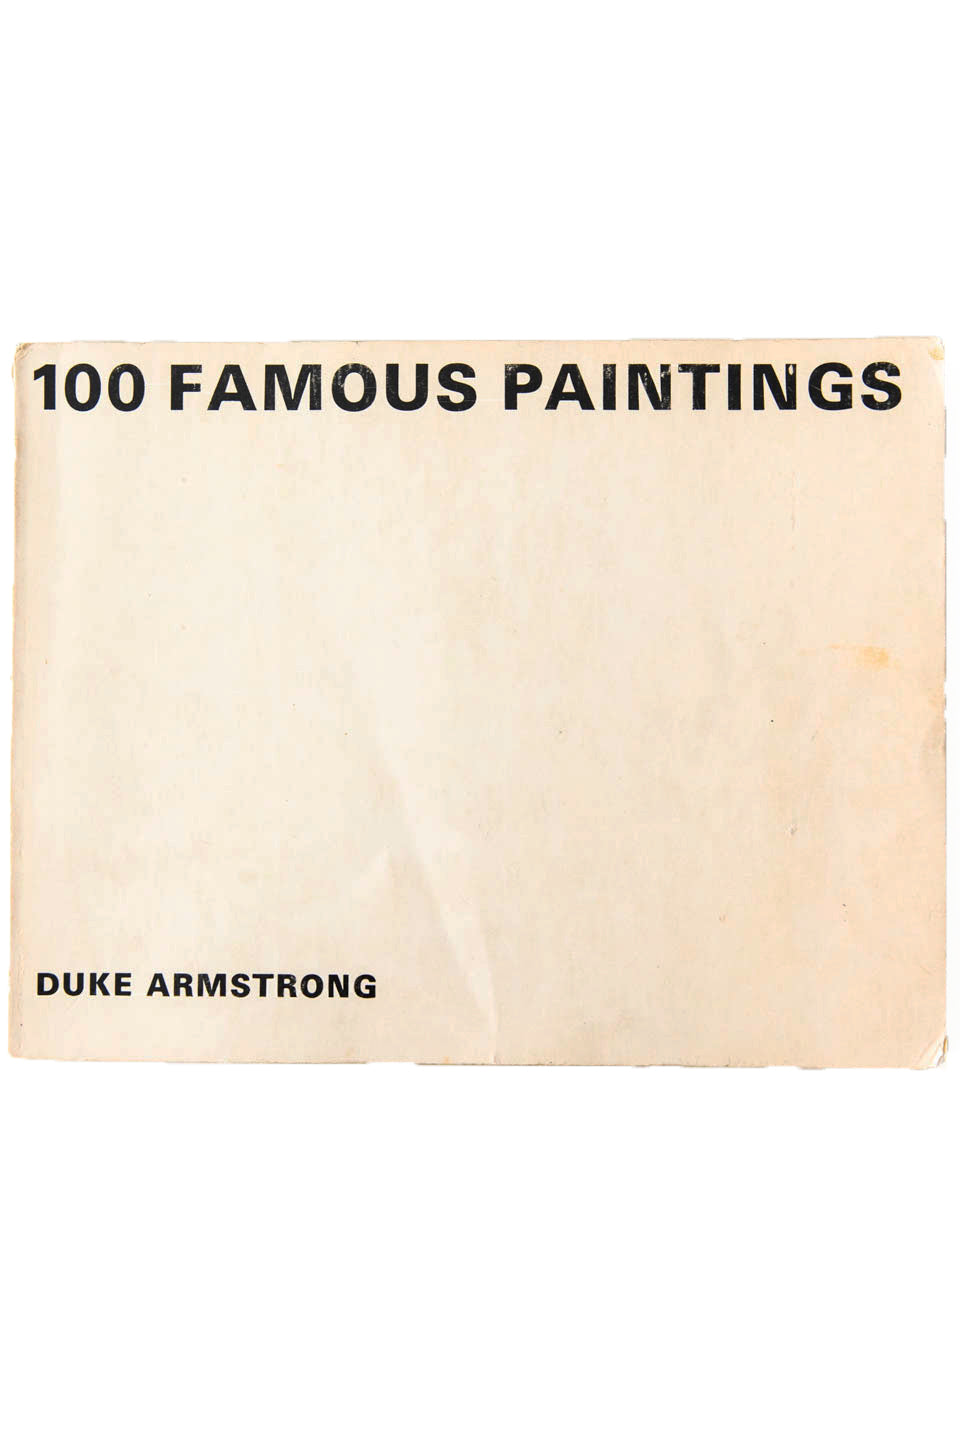 100 FAMOUS PAINTINGS